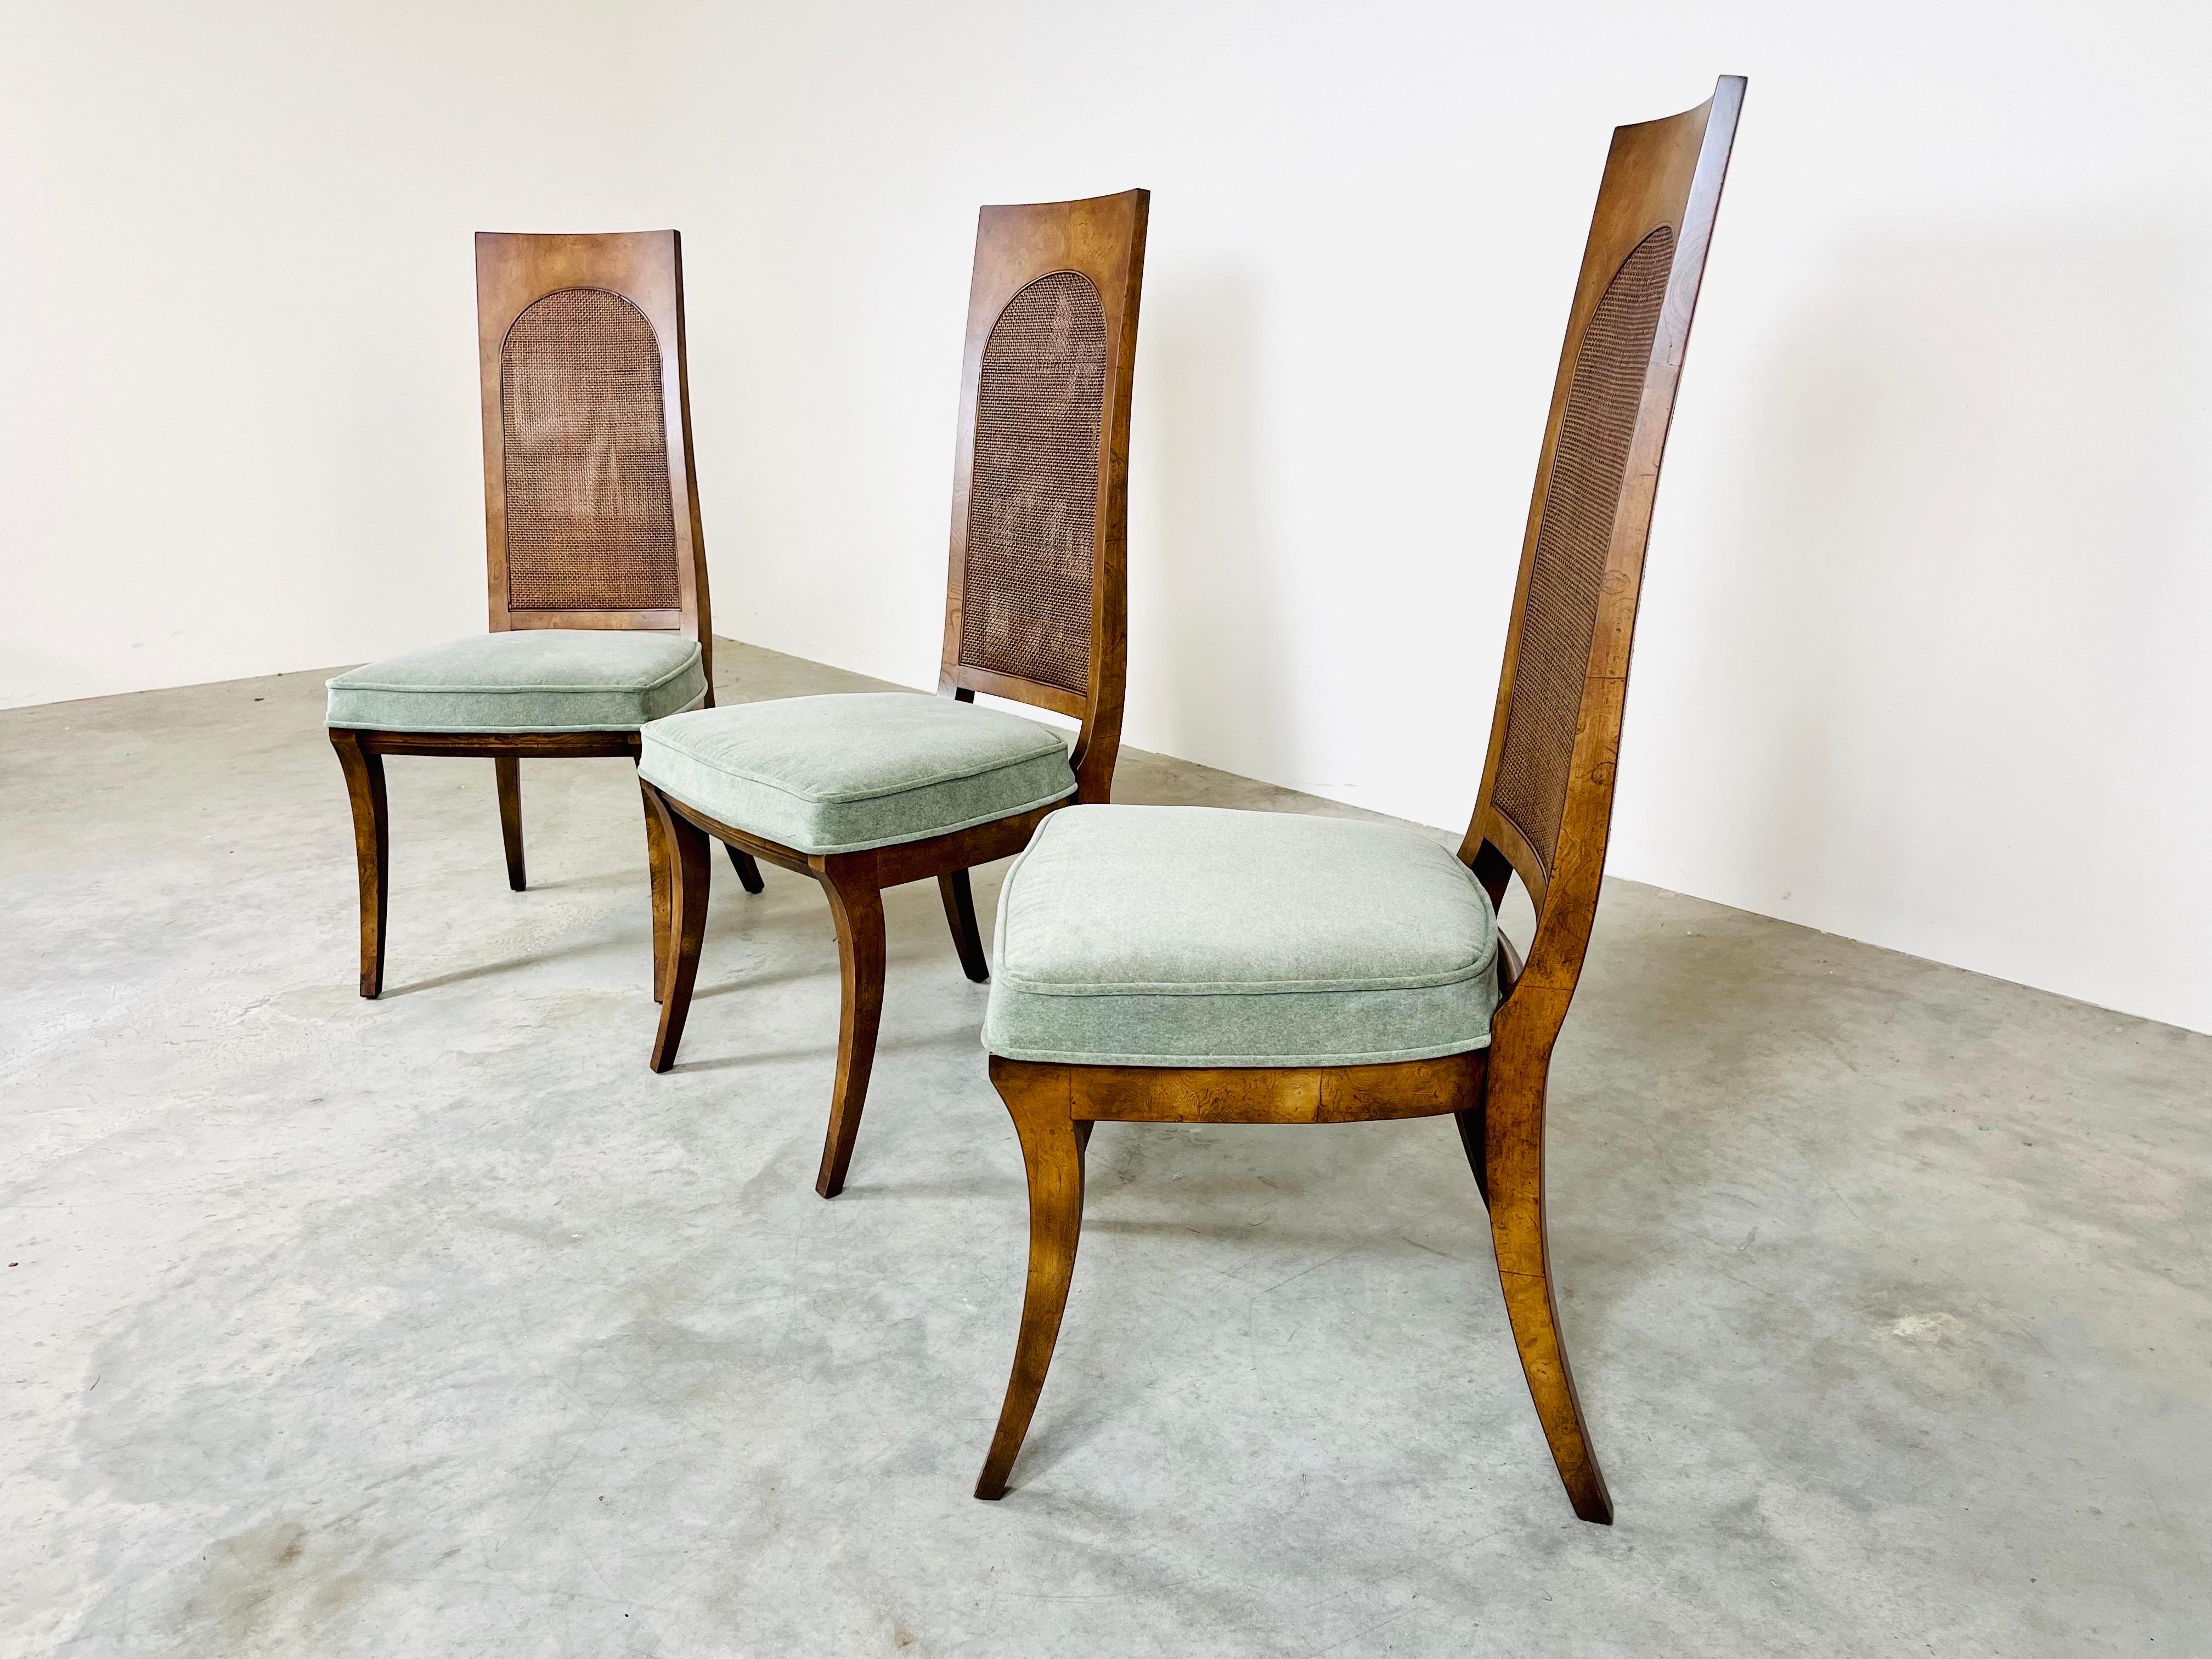 Caning 6 Midcentury Klismos Double Cane Back Dining Chairs in Bird’S-Eye Maple & Mohair